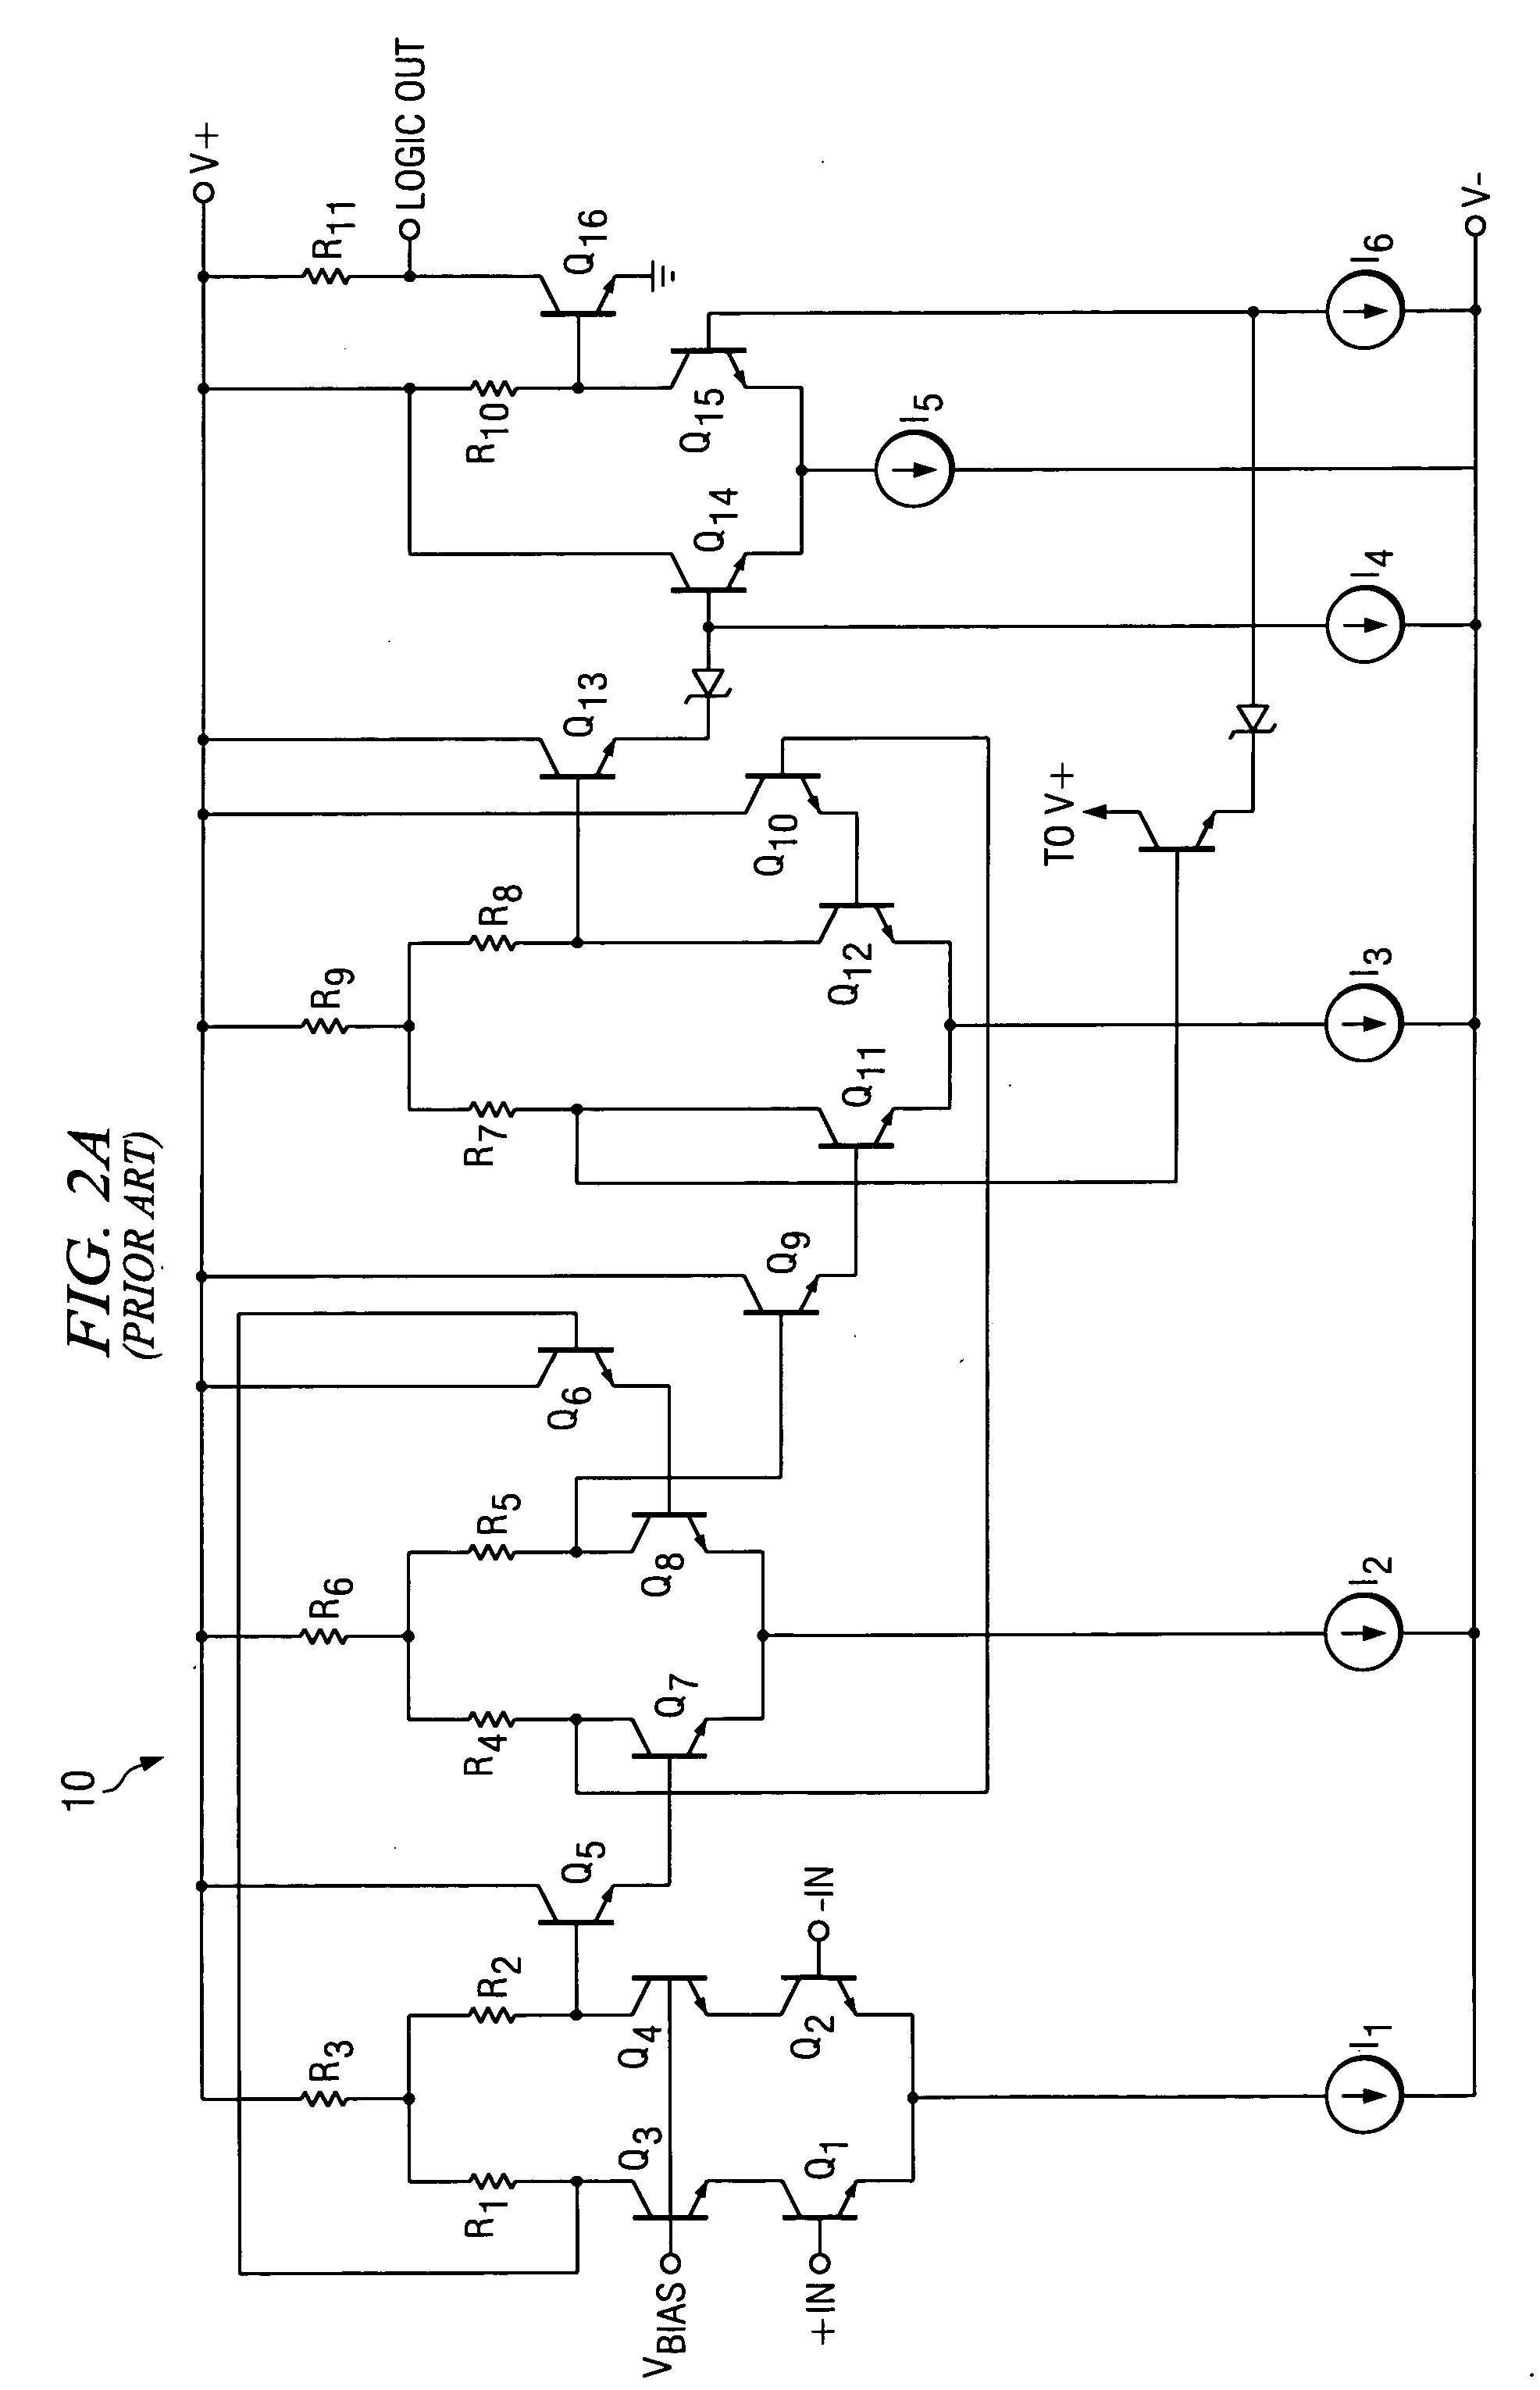 Efficient current monitoring for DC-DC converters